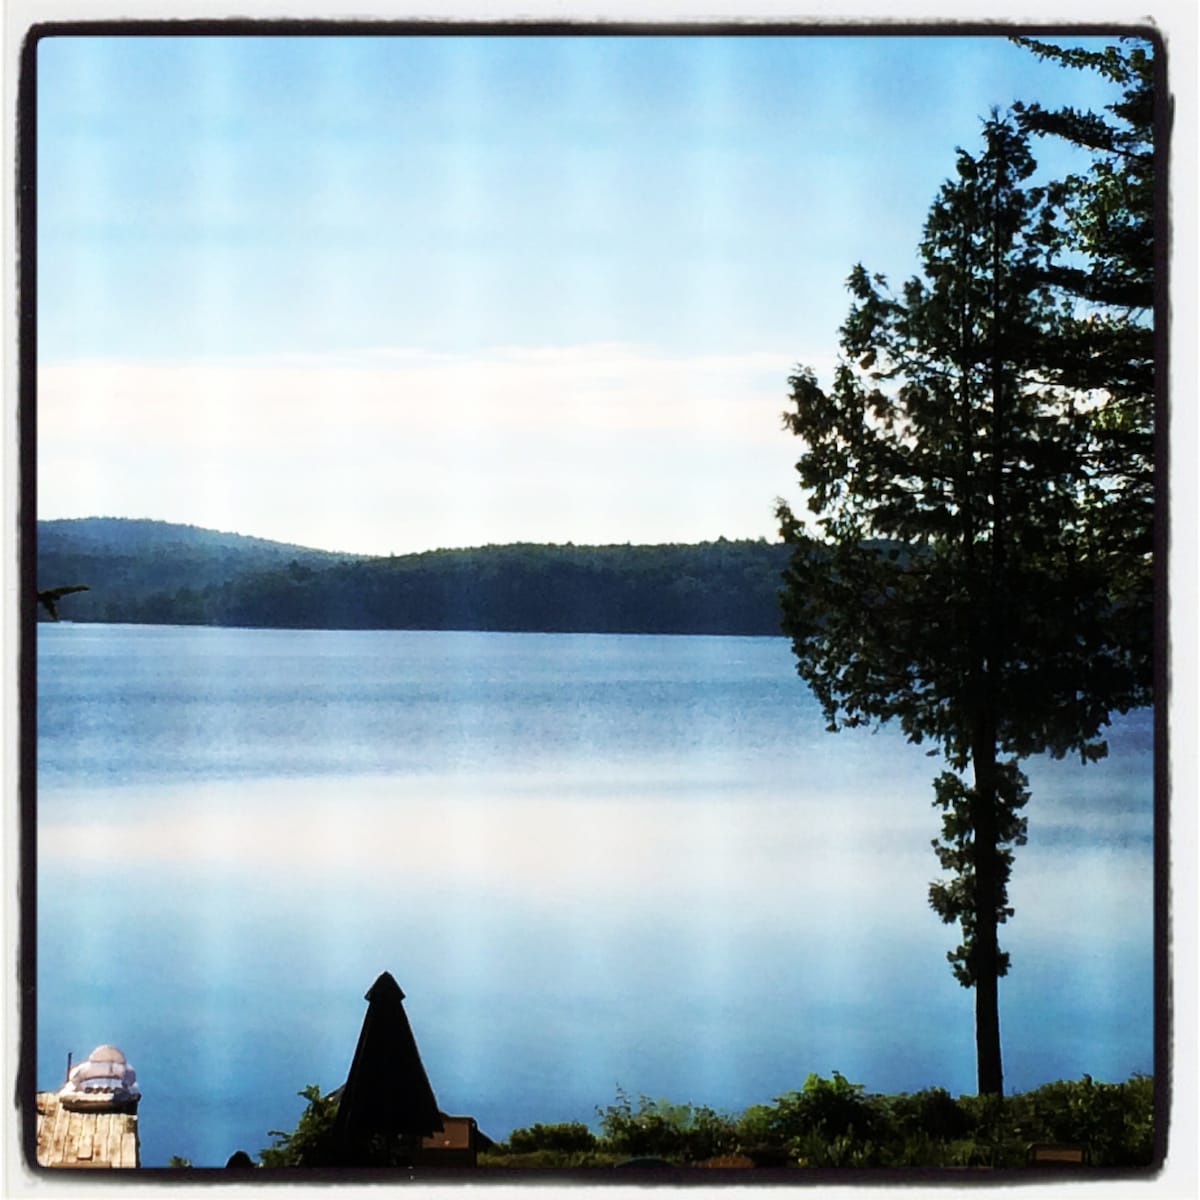 Enjoy lake life in the heart of Maine.